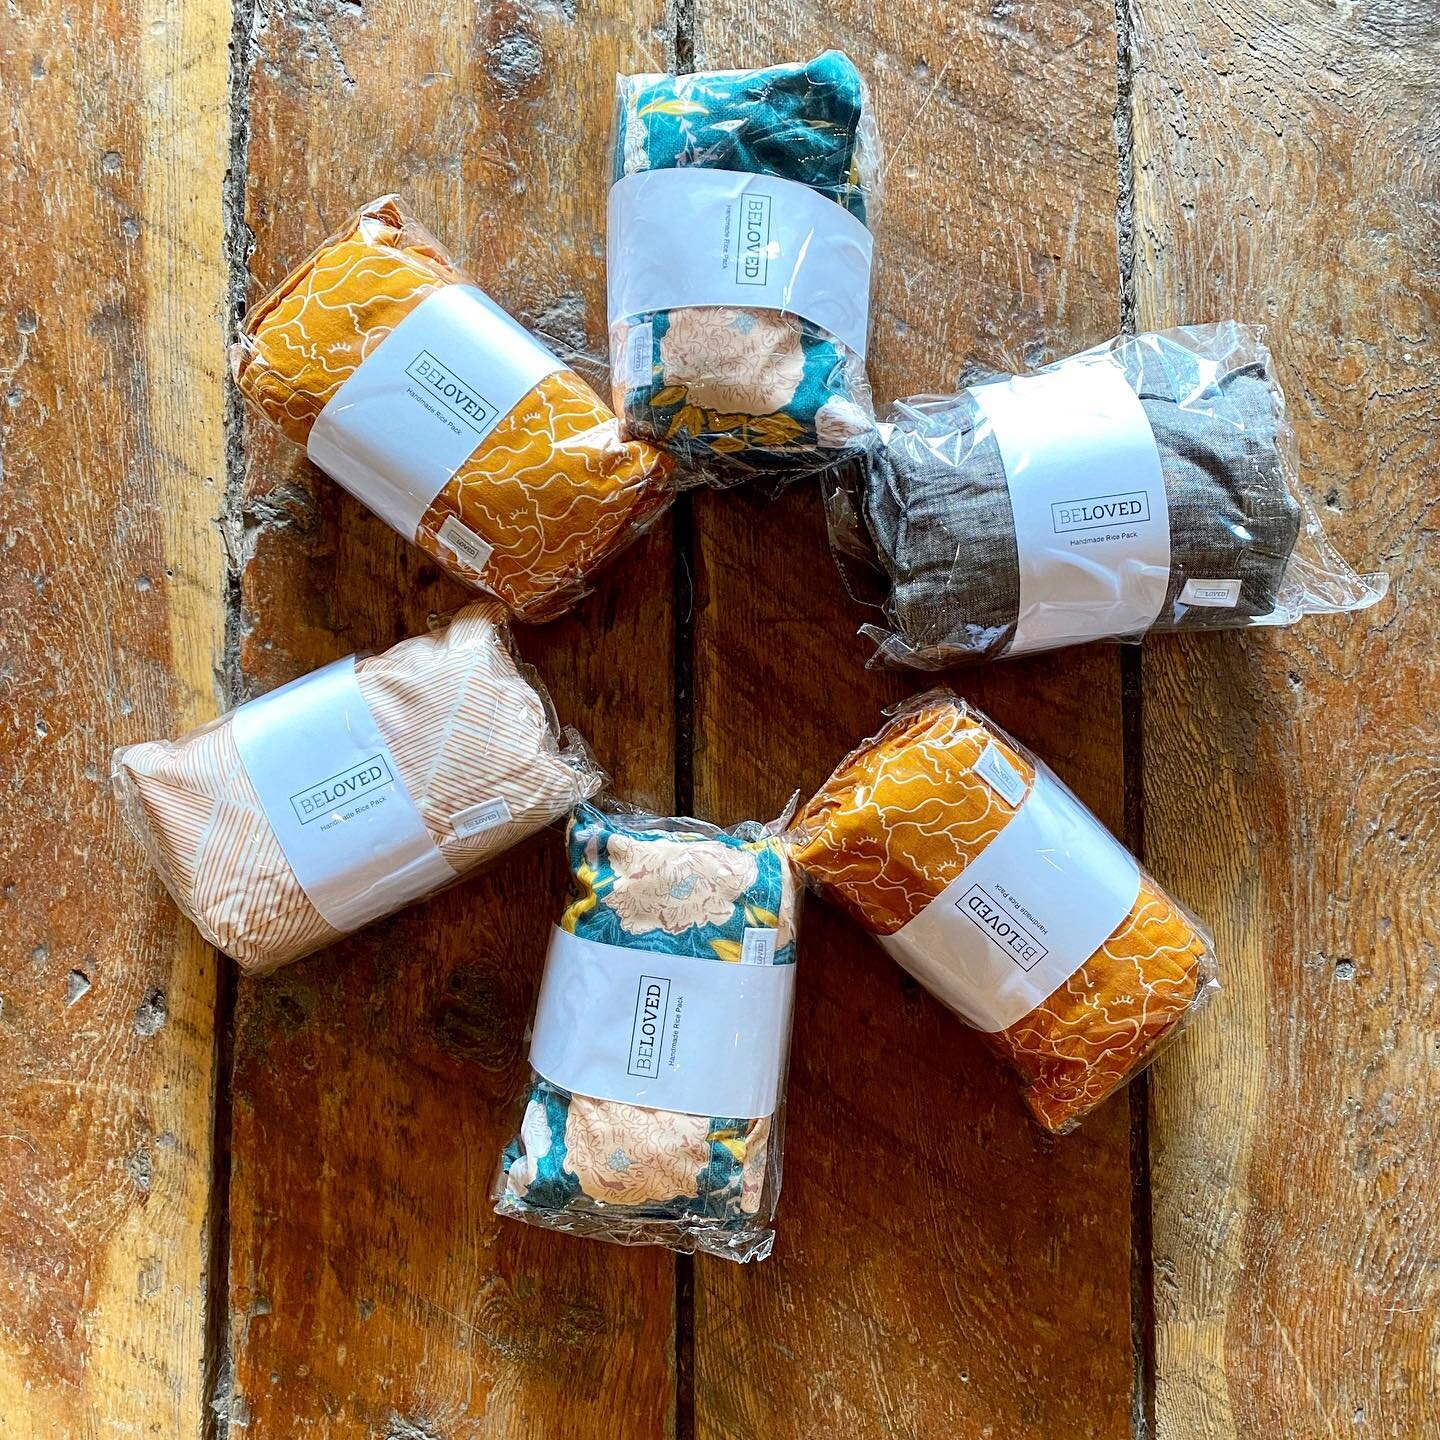 New maker alert! Vida of @belovedbyv crafts these lovely handmade rice packs, with the intention of comfort and love. &ldquo;Her overall mission is to create welcoming spaces and experiences that encourage people to heal and flourish not matter their